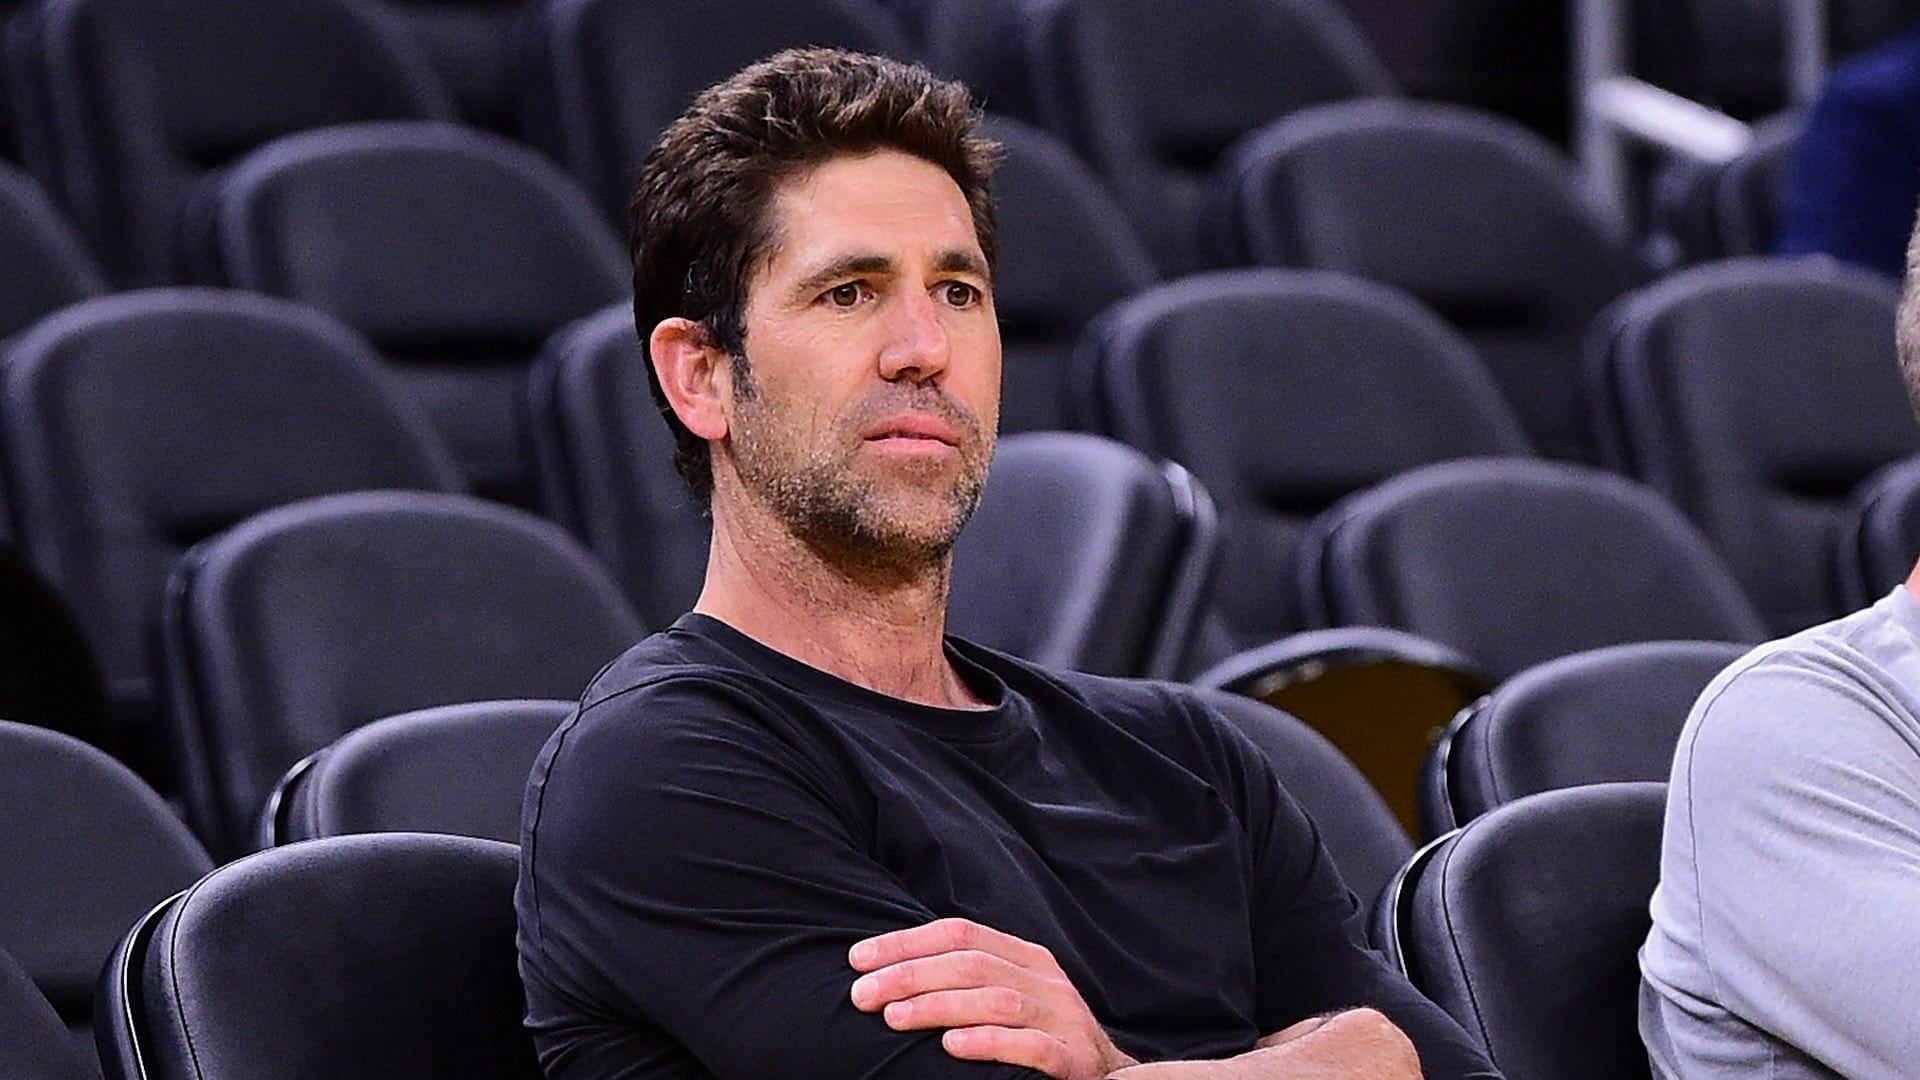 Bob Myers was one of the top-earning NBA executives before deciding to step down as general manager and president of the Golden State Warriors.